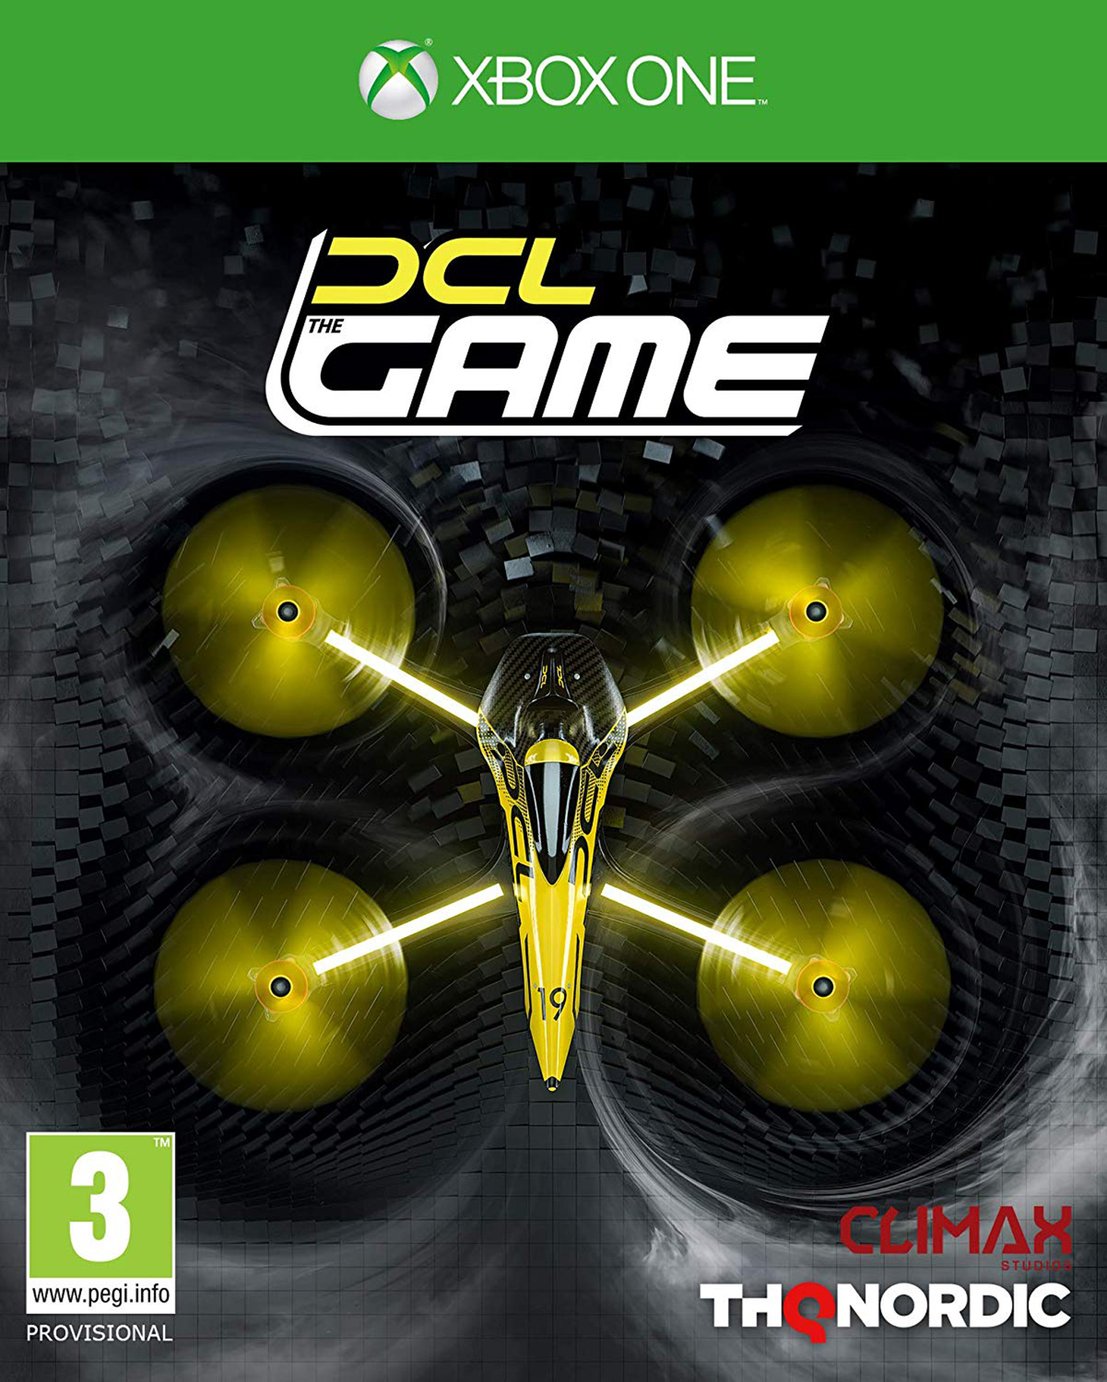 DCL Drone Championship League Xbox One Pre-Order Game